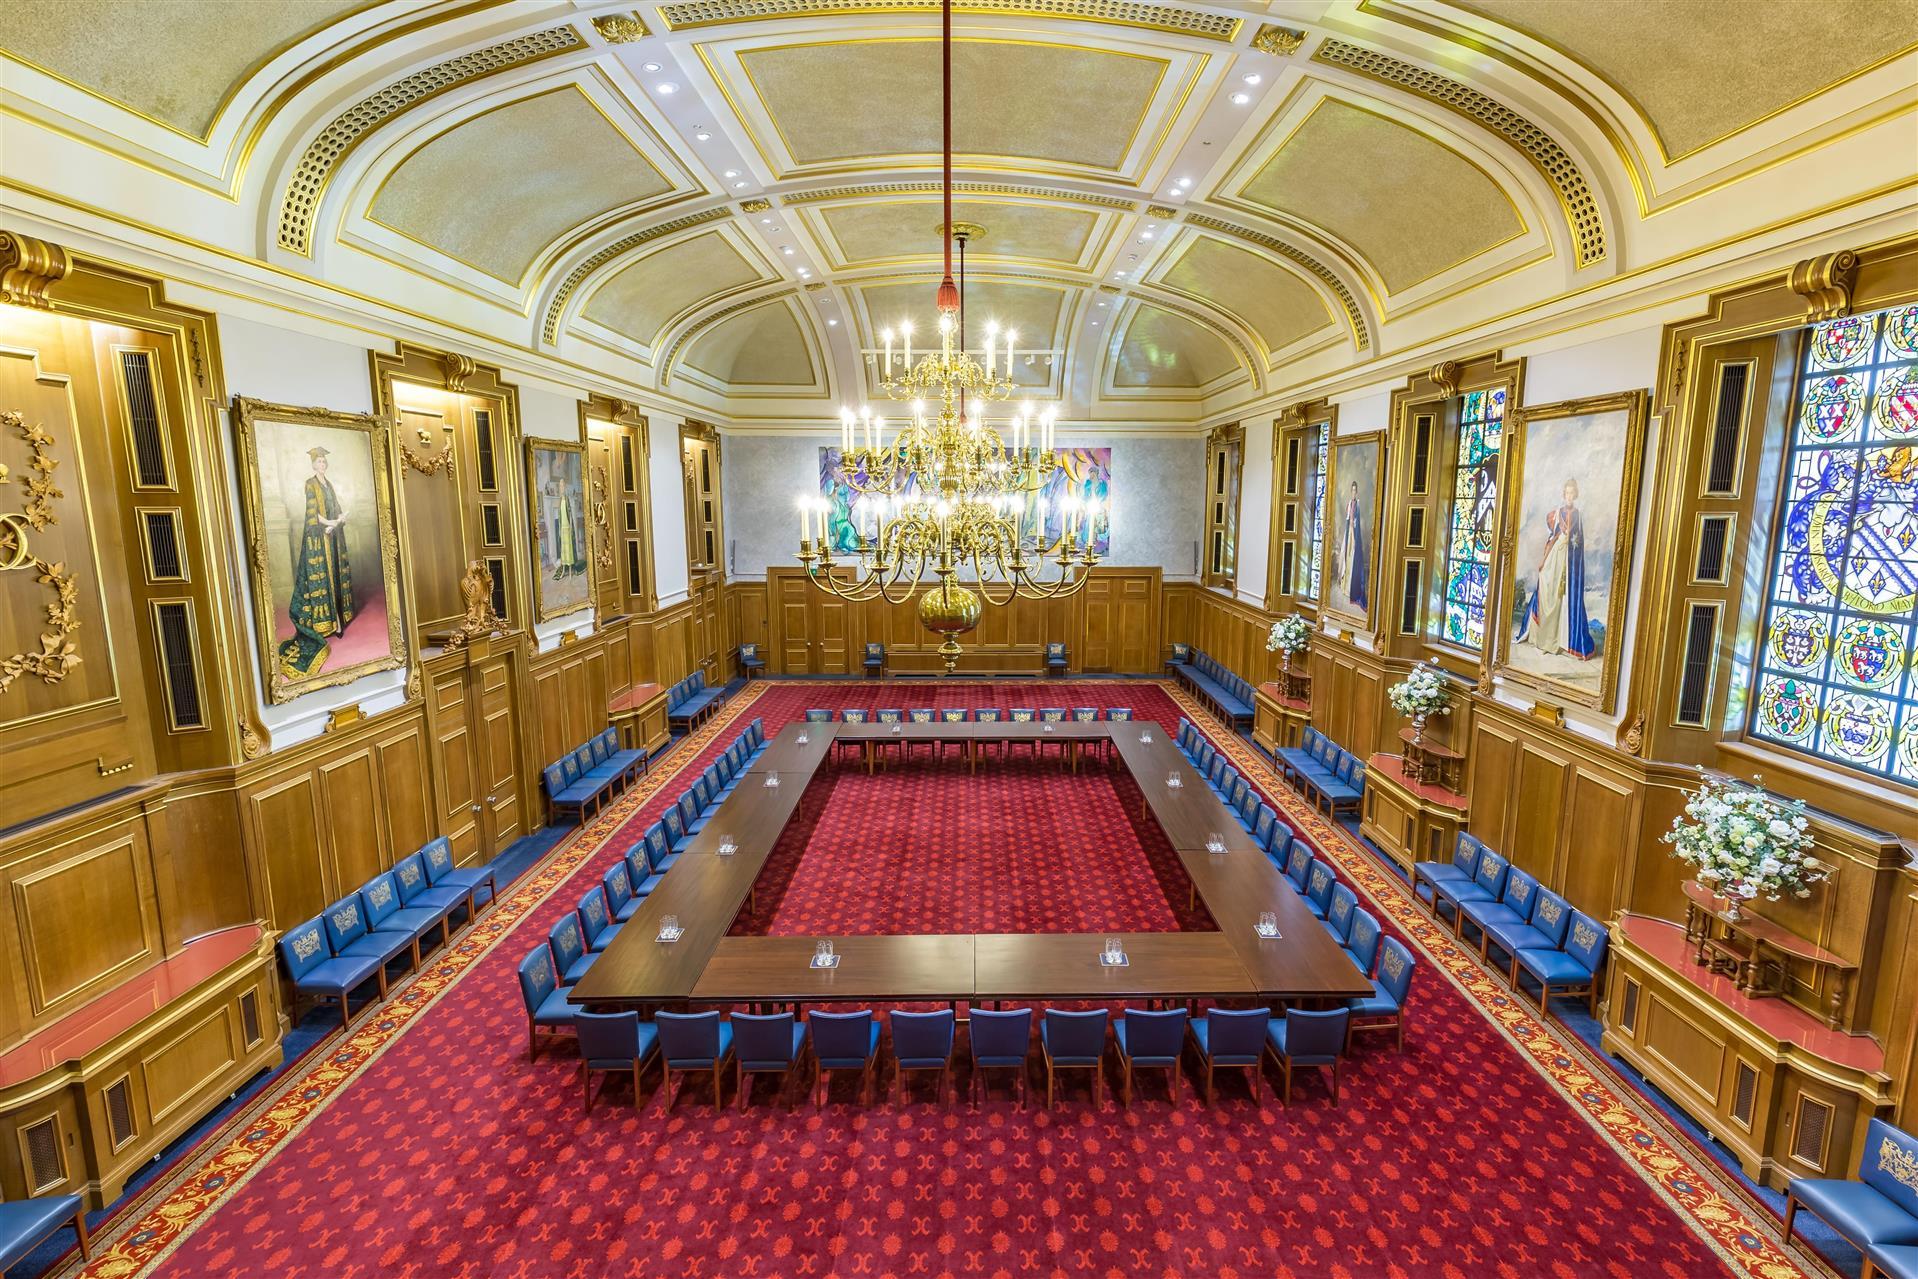 Clothworkers" Hall in London, GB1